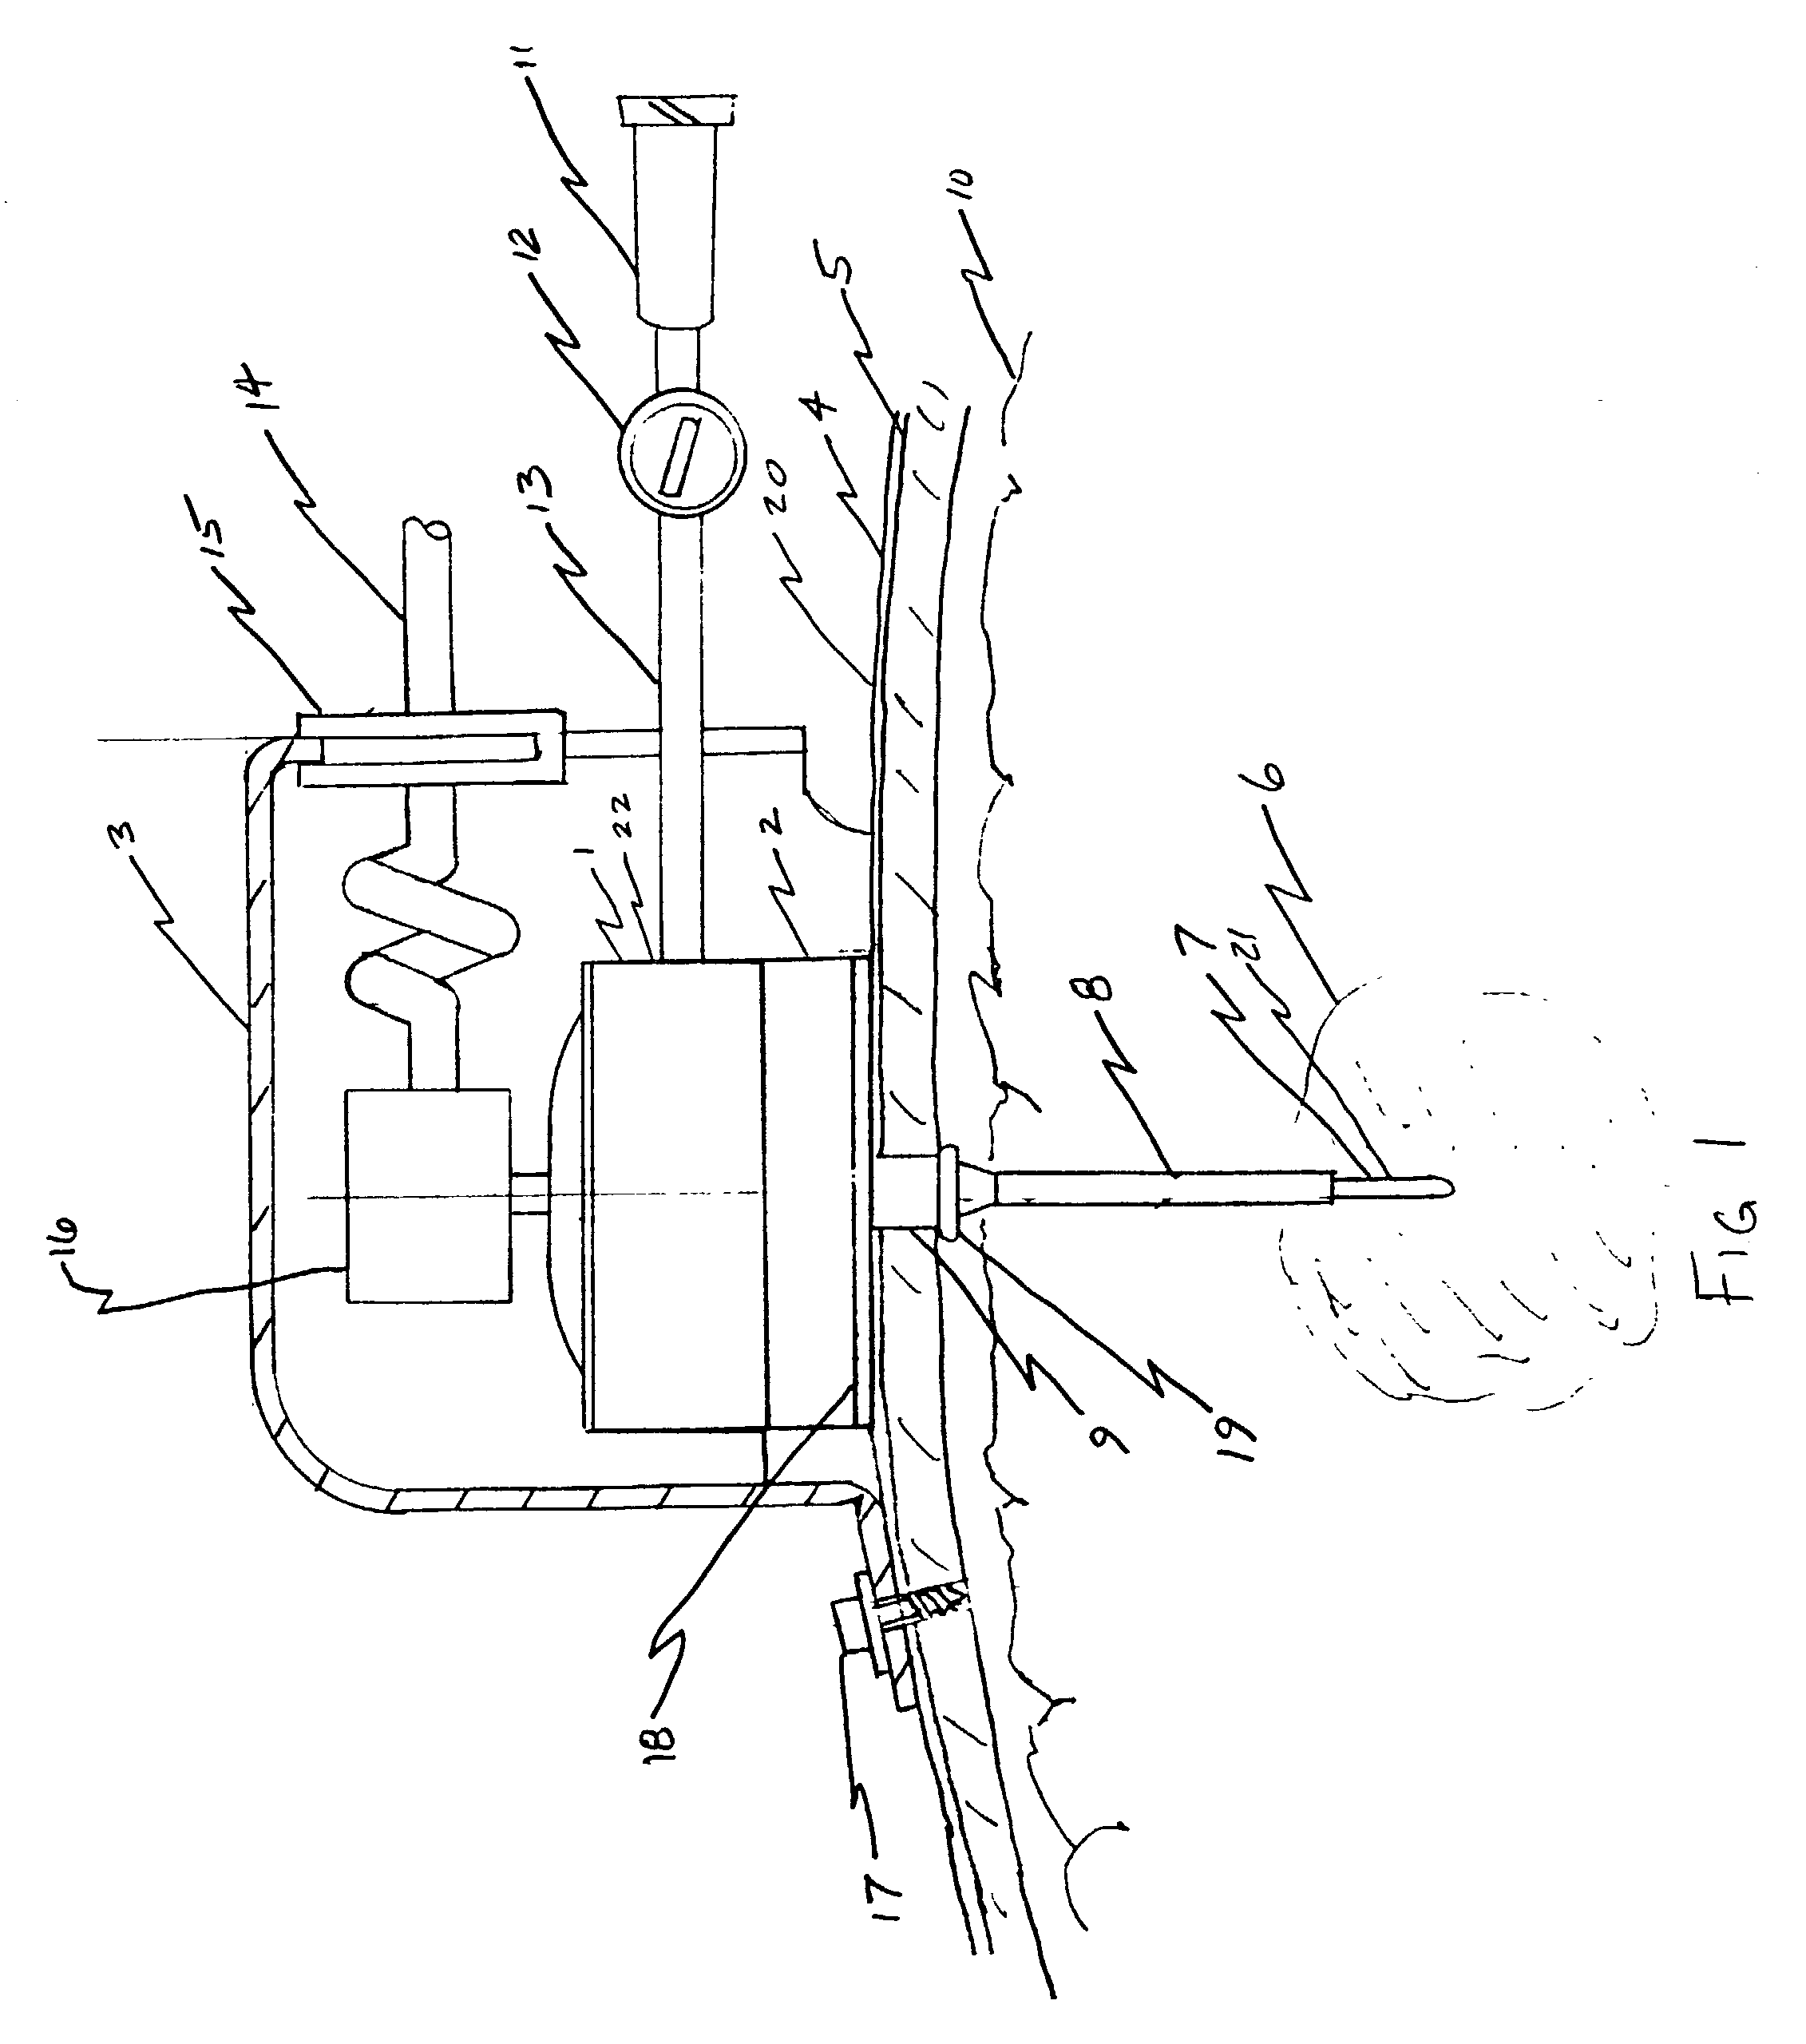 Interstitial brain cooling probe and sheath apparatus